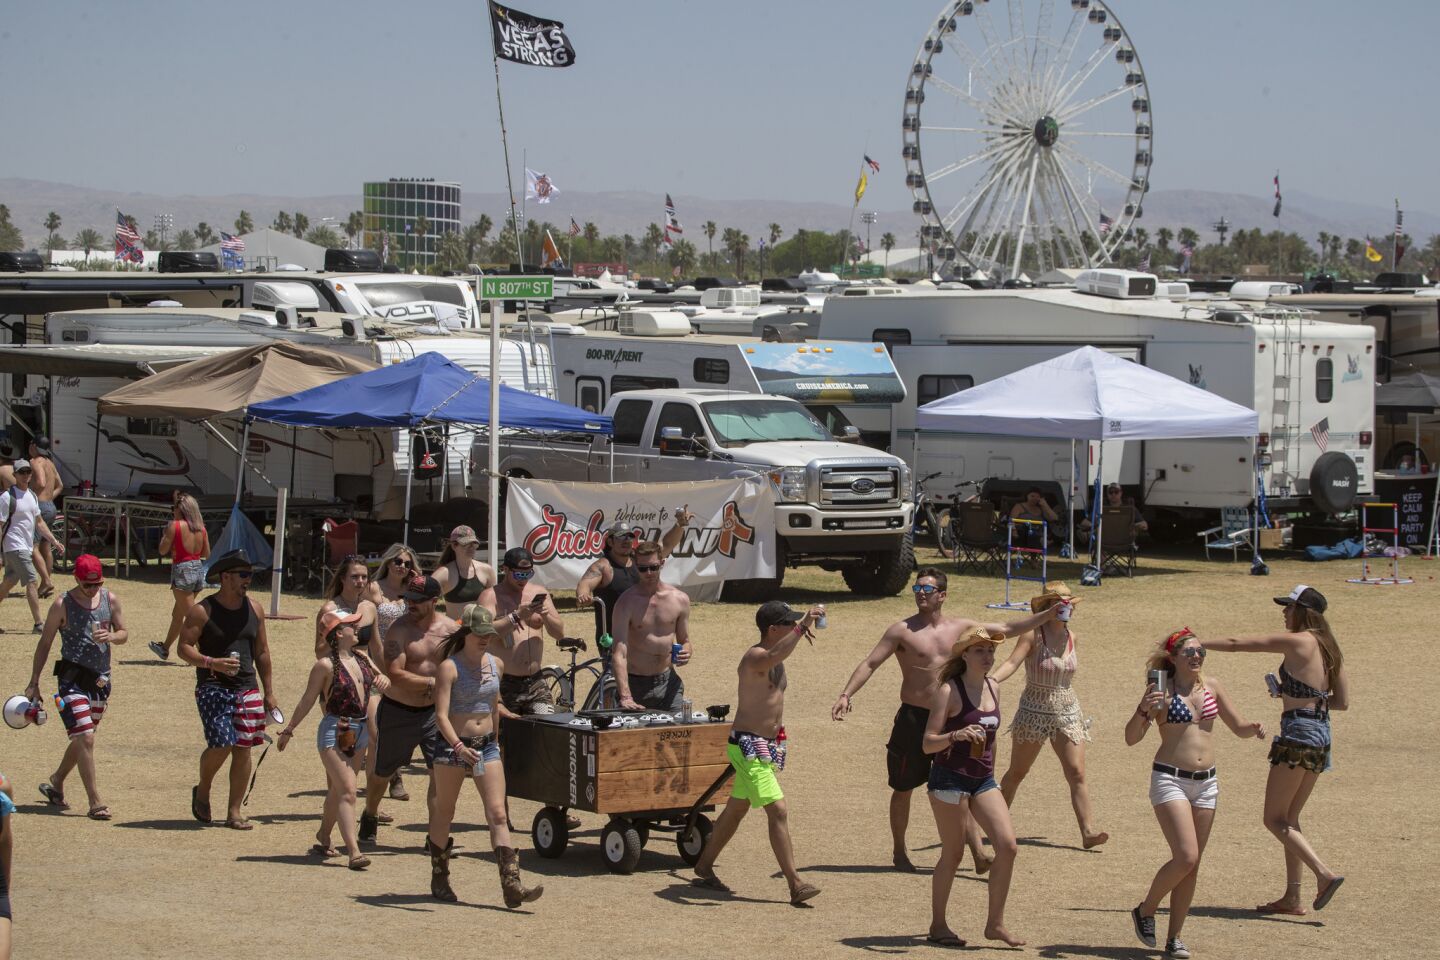 Country music fans parade through the RV area at the Empire Polo Club on Sunday, pulling a wagon with a giant speaker blasting music.